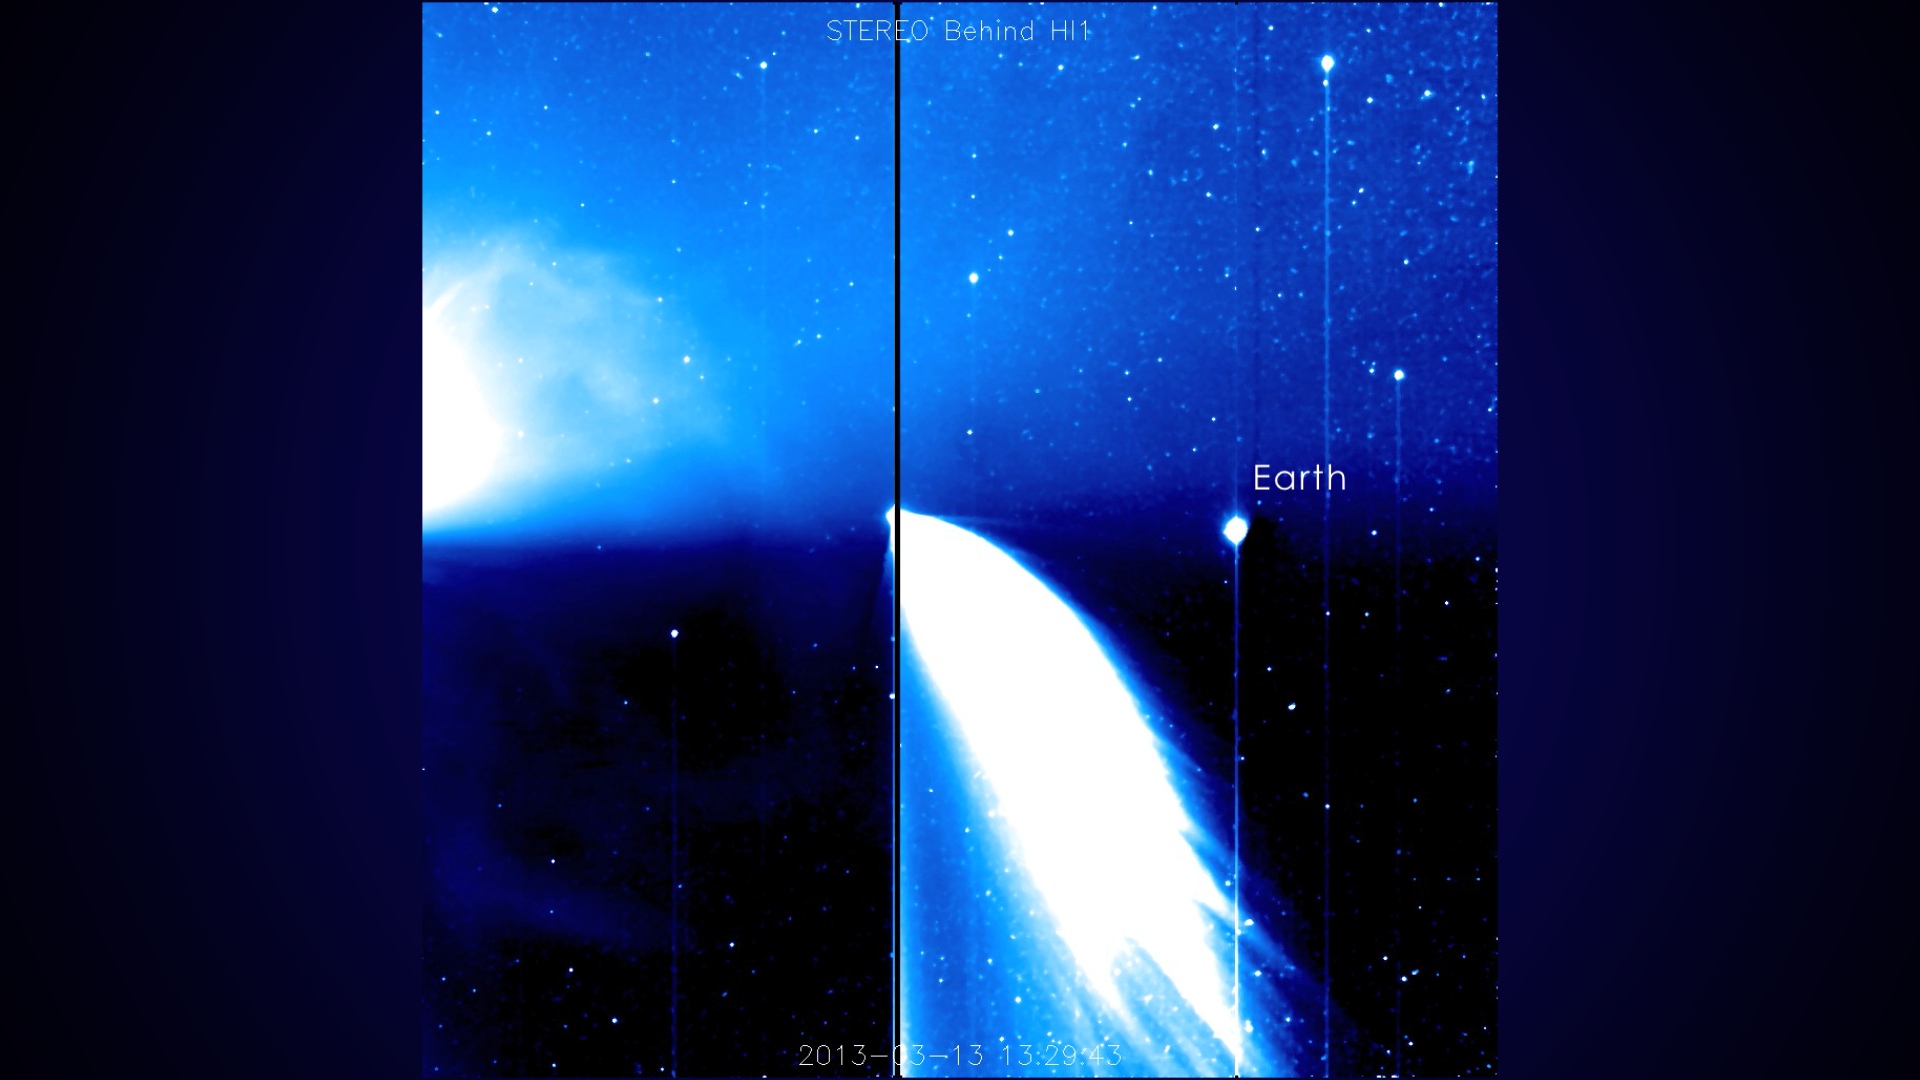 Video of PanSTARRS and three coronal mass ejections CMEs) as viewed by STEREO Behind's HI1 instrument.For complete transcript, click here.